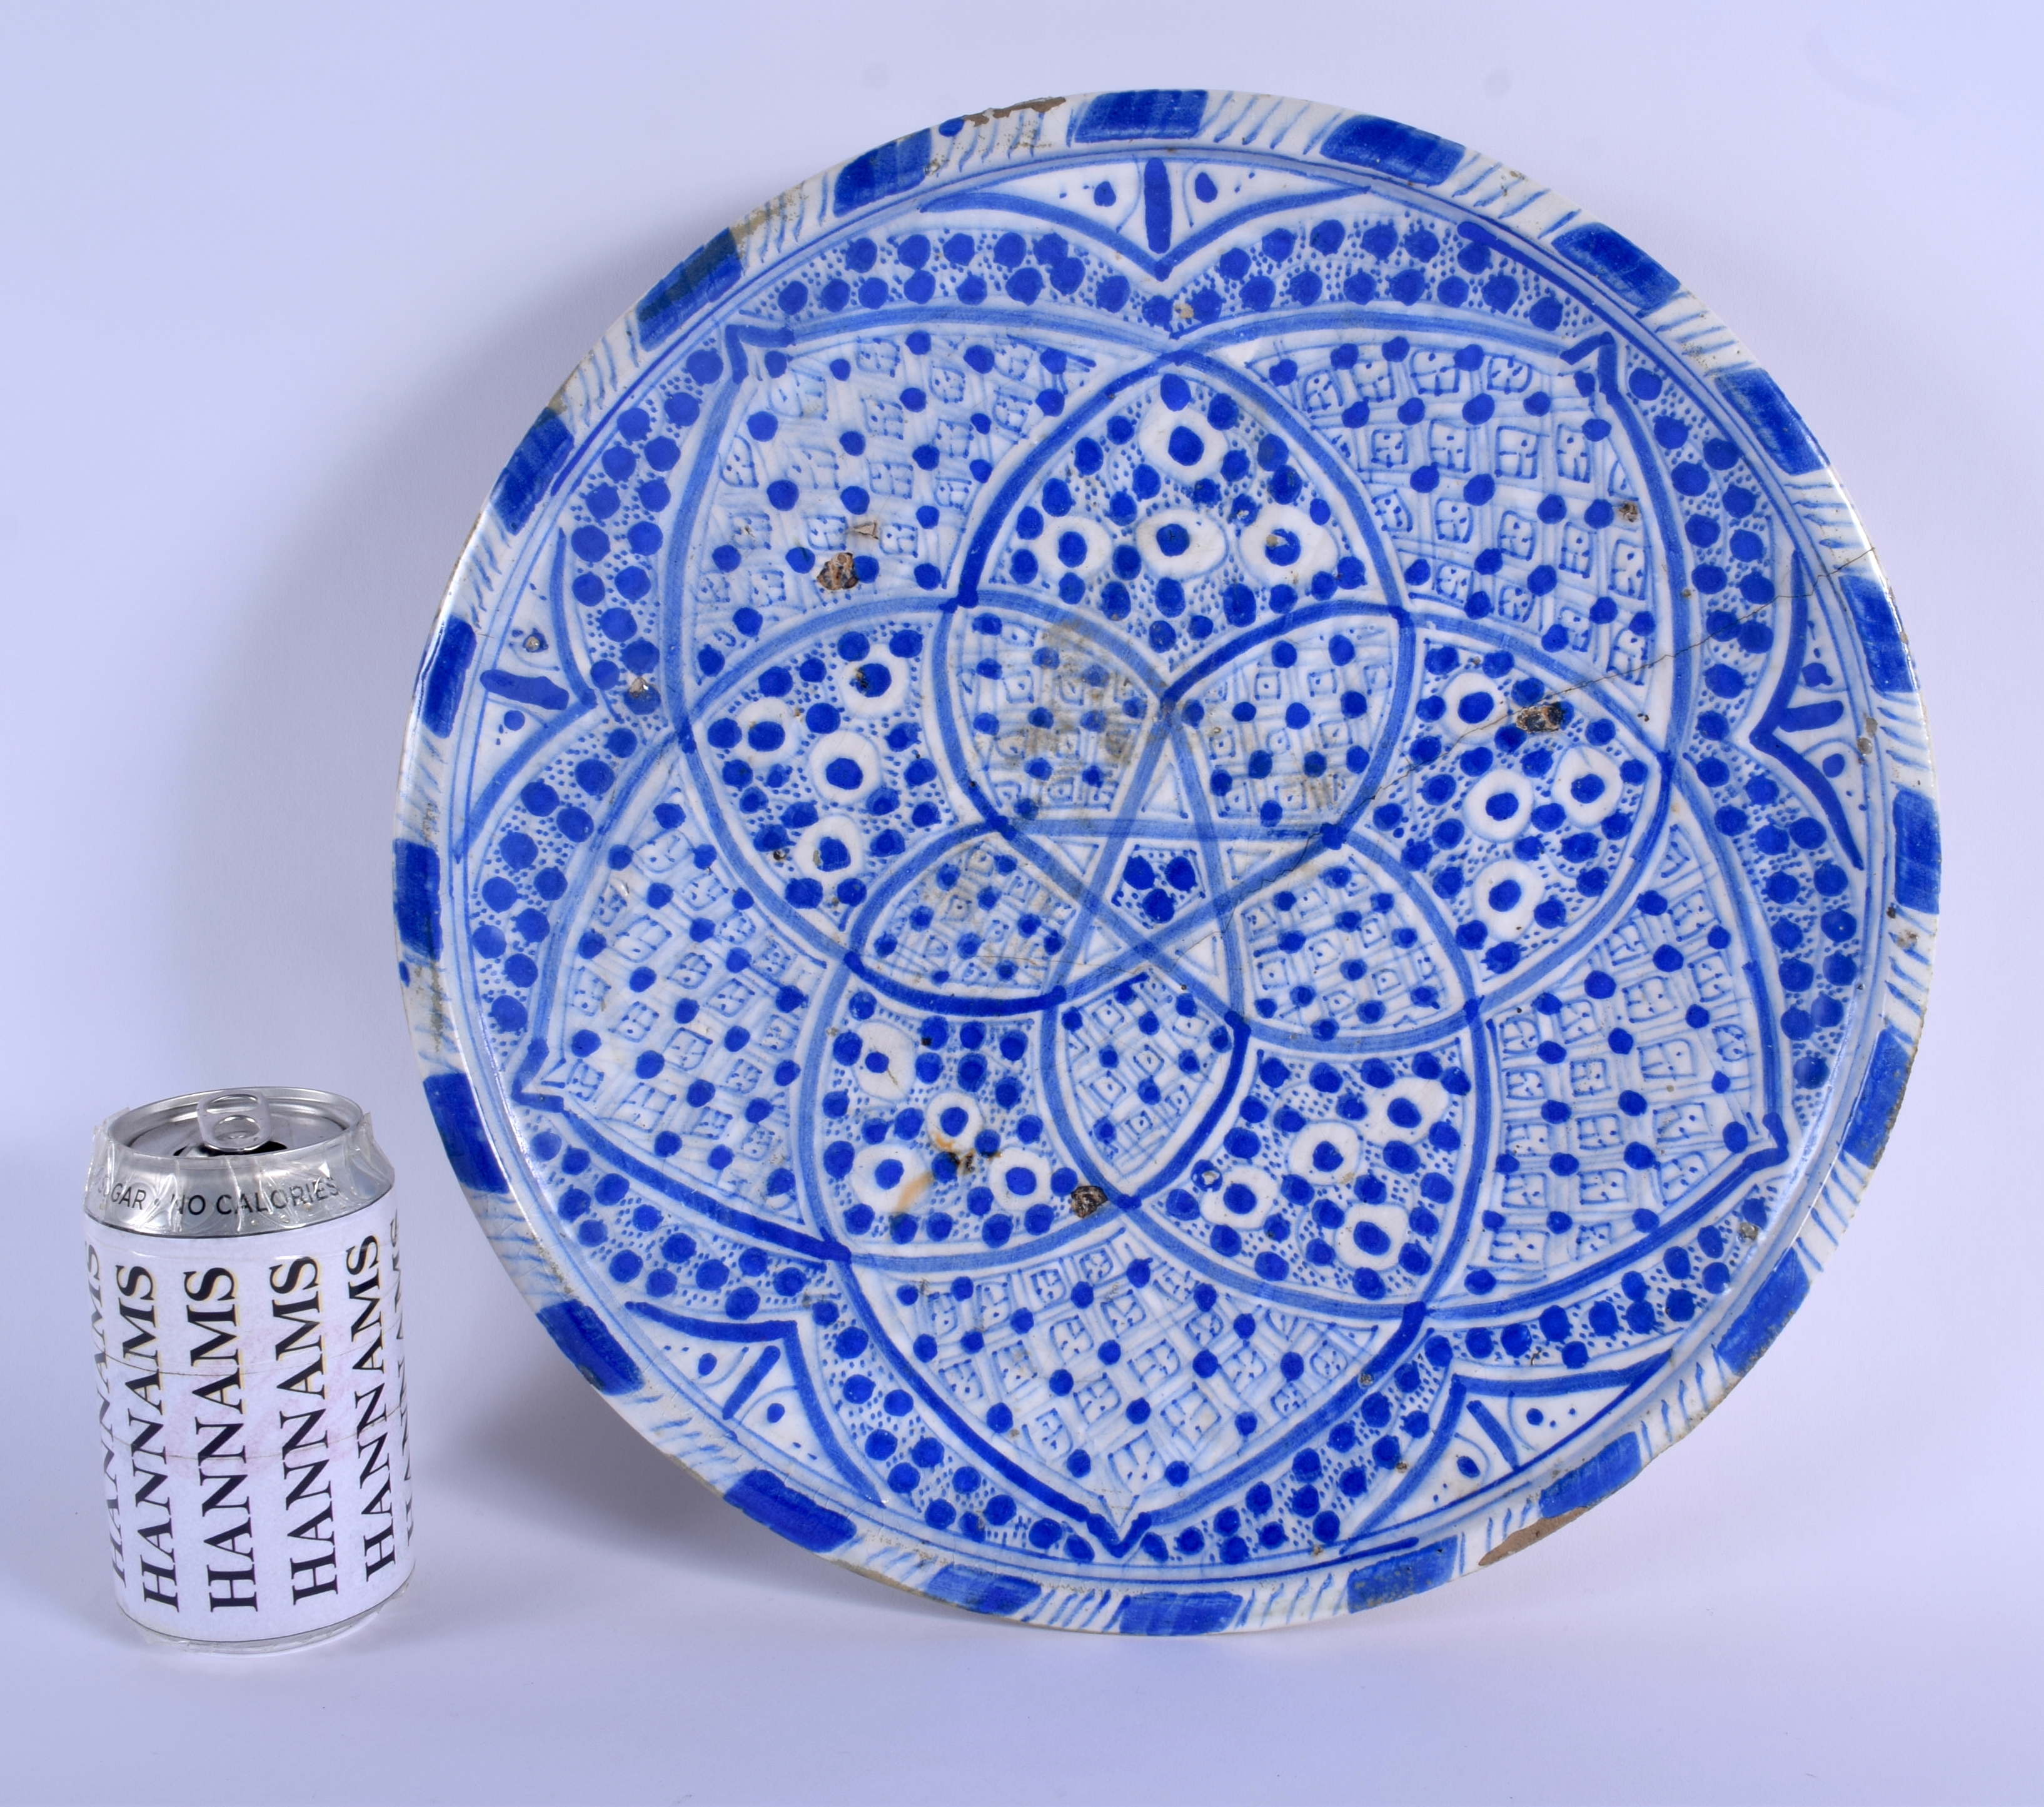 A 19TH CENTURY ARTS AND CRAFTS PERSIAN MIDDLE EASTERN BLUE AND WHITE DISH. 31 cm diameter.